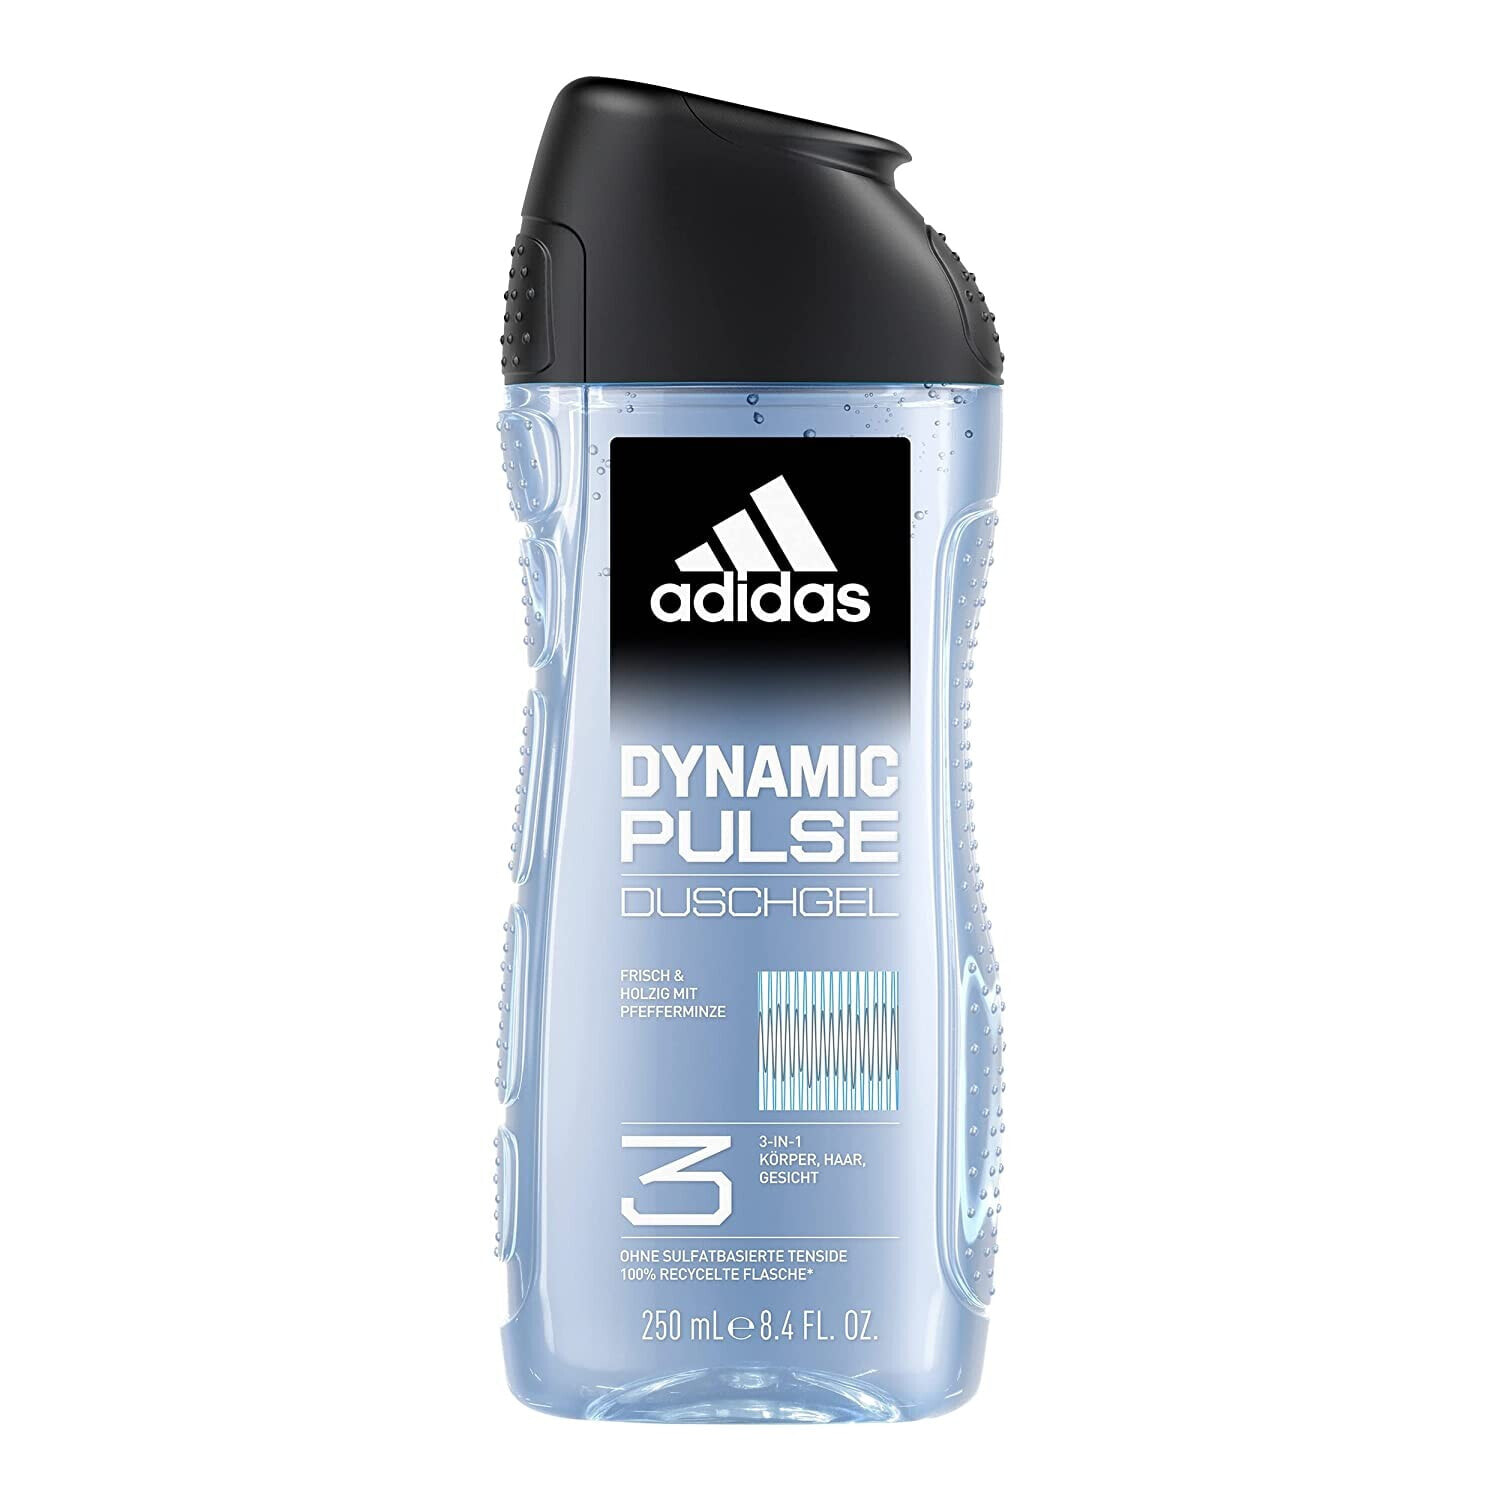 adidas 3-in-1 Dynamic Pulse Shower Gel for Him with Woody Fresh Scent 250 ml